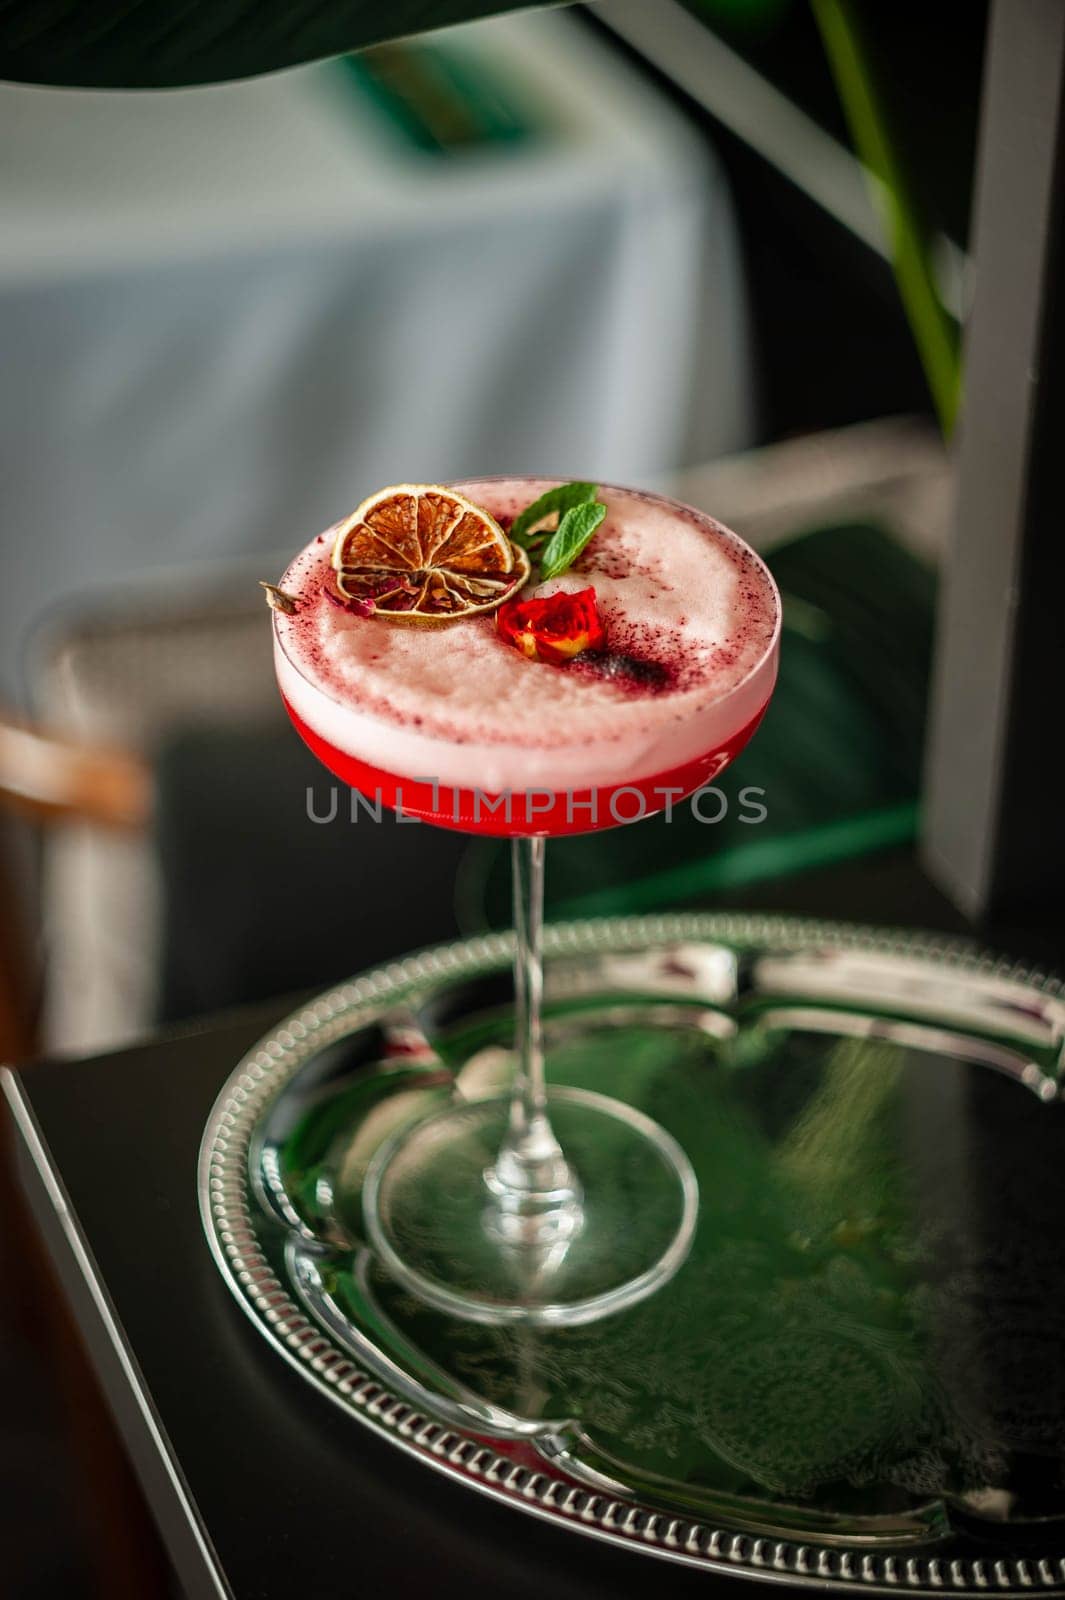 Pink lady alcoholic cocktail drink with gin, grenadine syrup and lemon juice by bizzyb0y